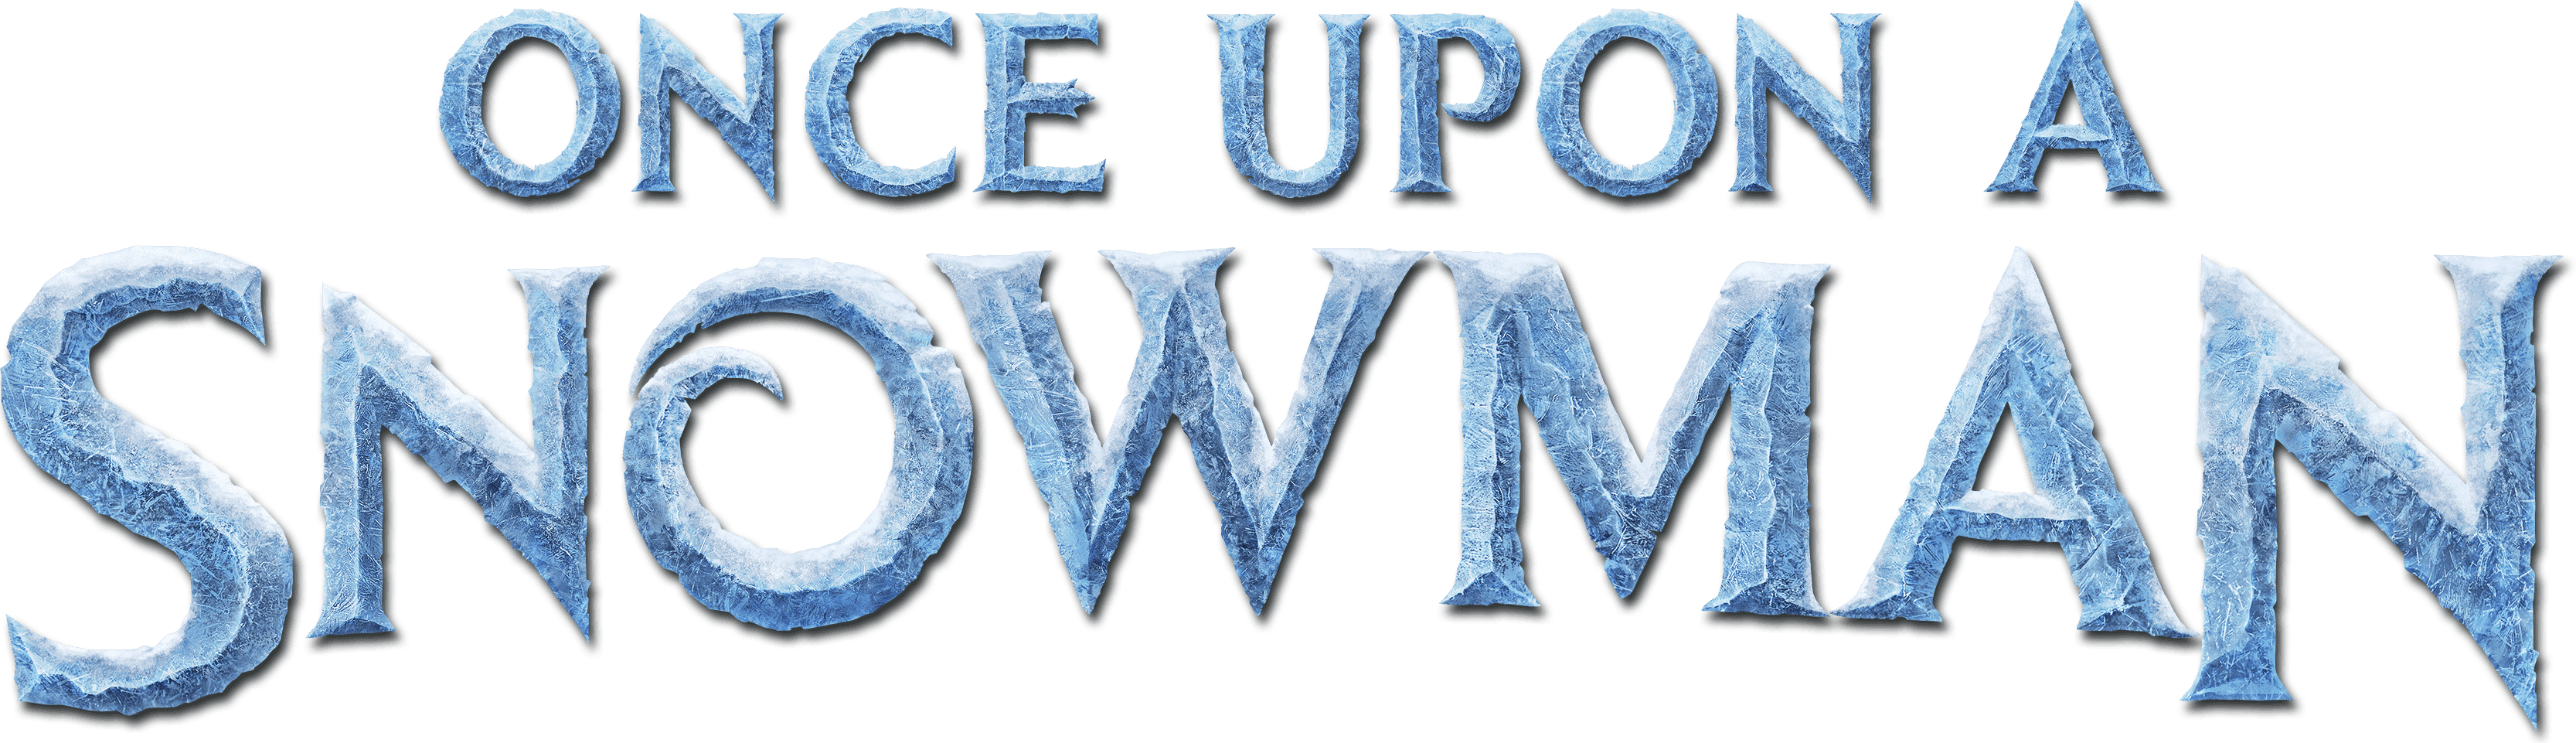 Once Upon a Snowman logo